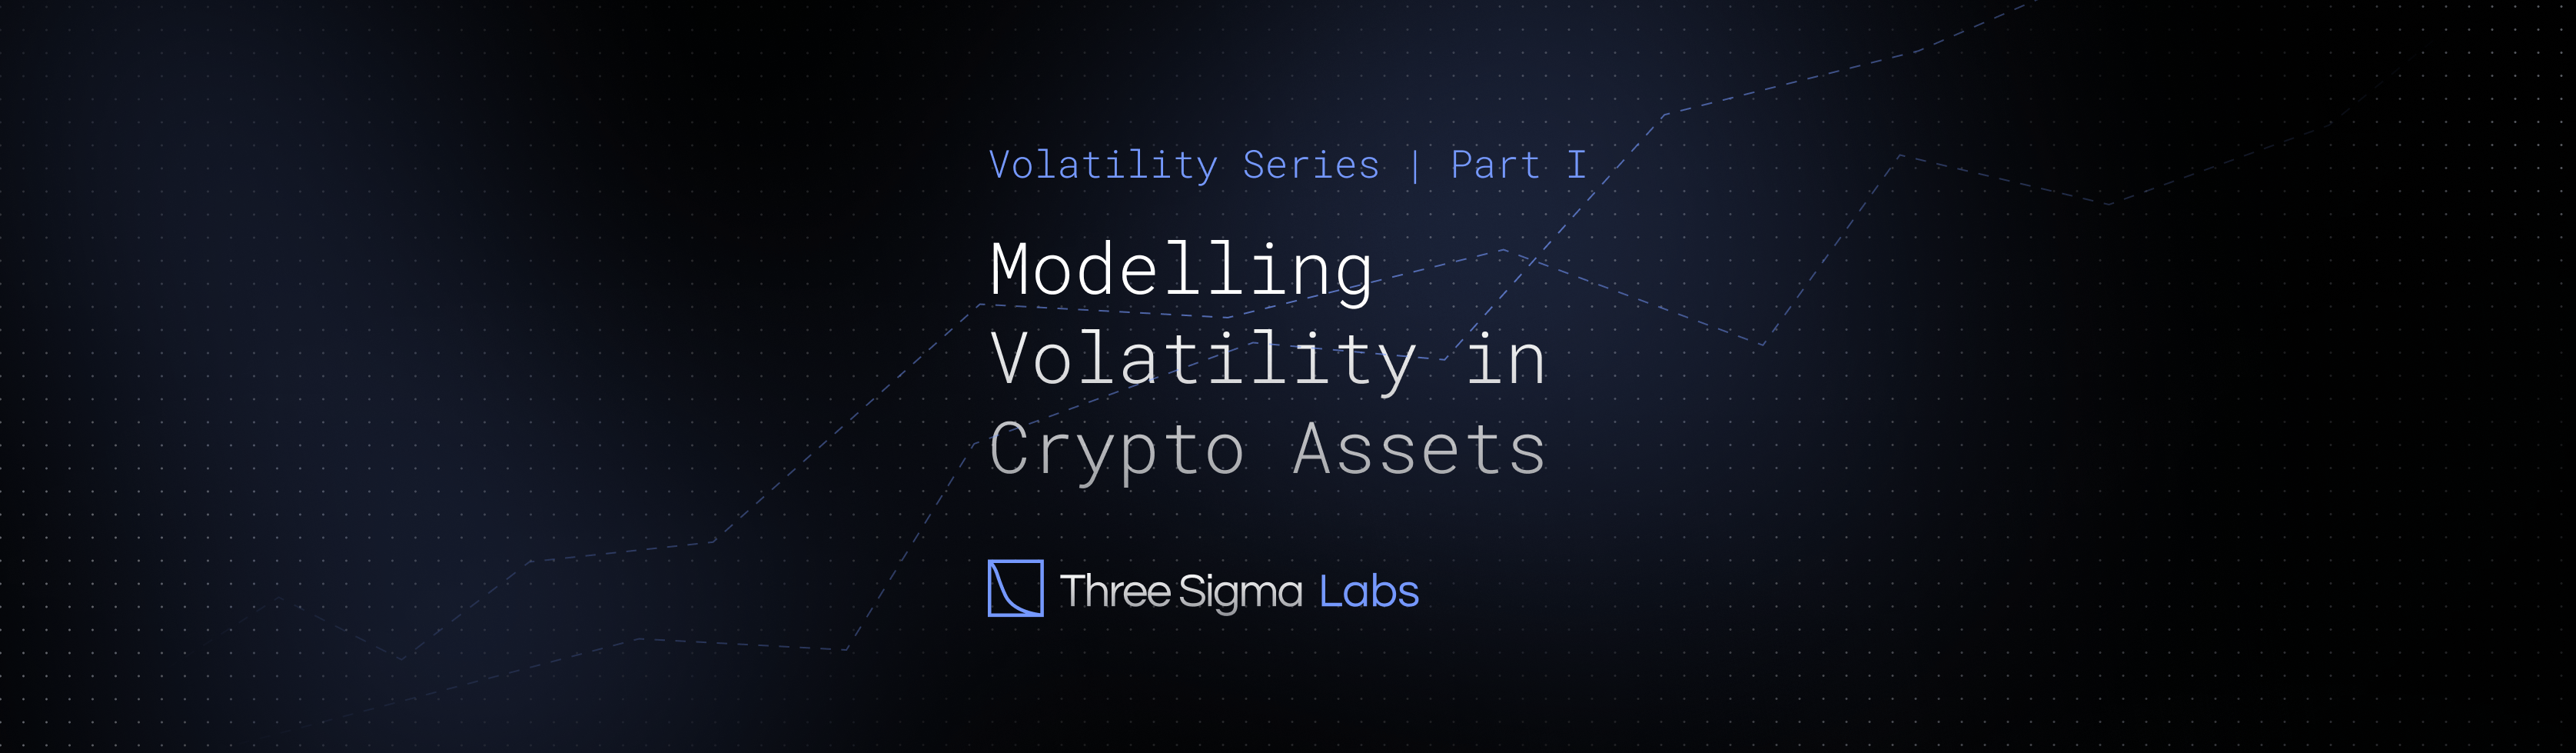 Cover Image for Volatility Series Part I - Modelling Volatility in Crypto Assets